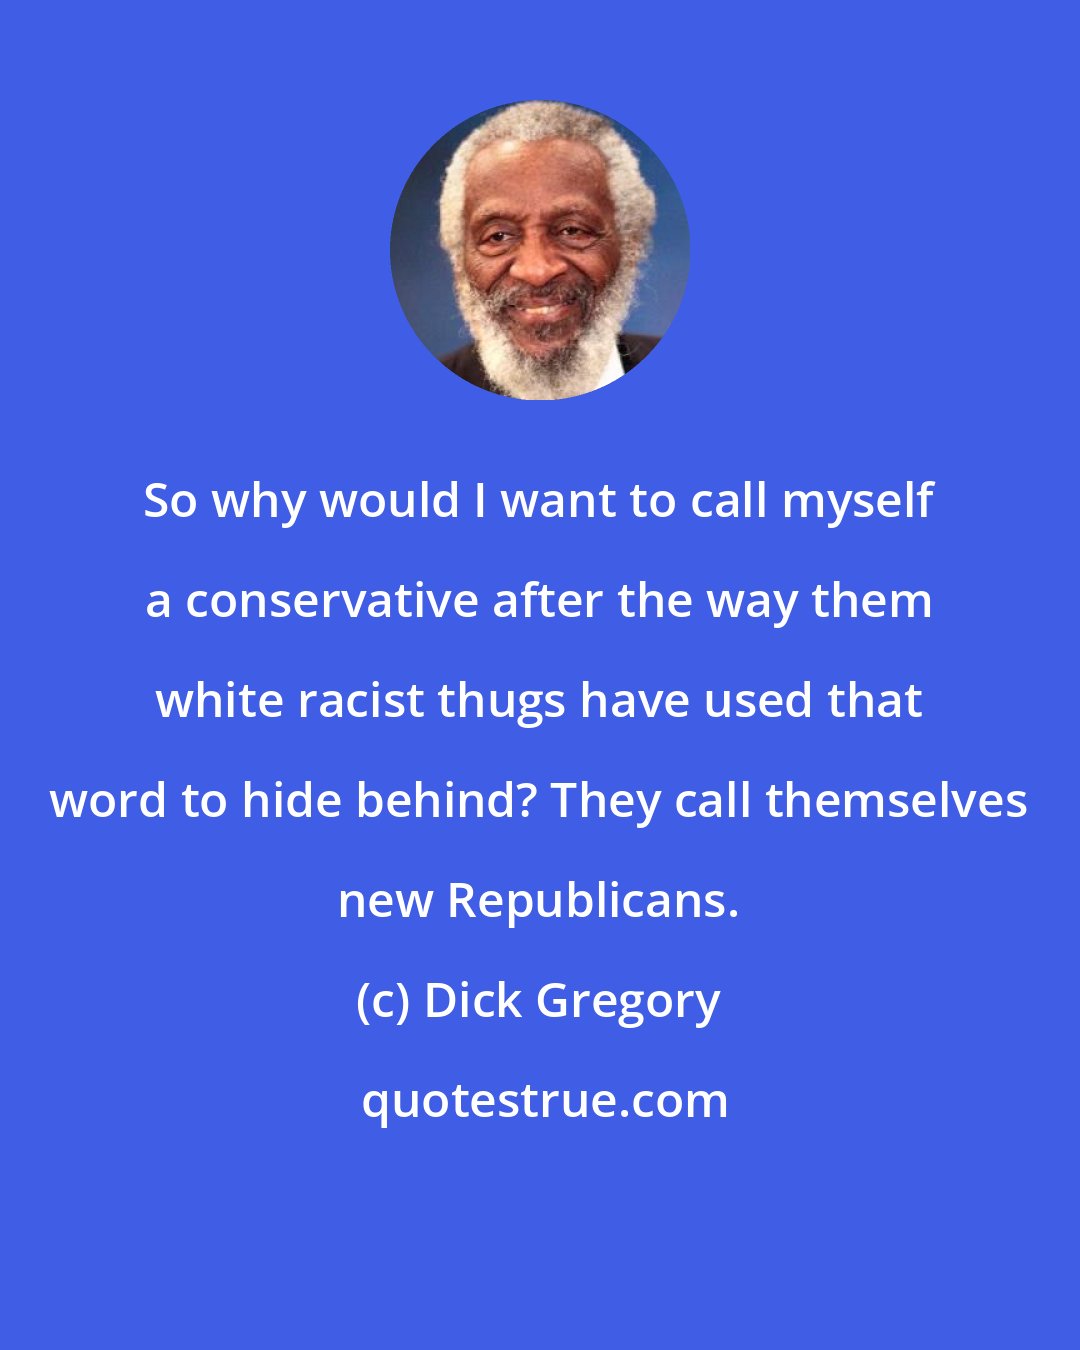 Dick Gregory: So why would I want to call myself a conservative after the way them white racist thugs have used that word to hide behind? They call themselves new Republicans.